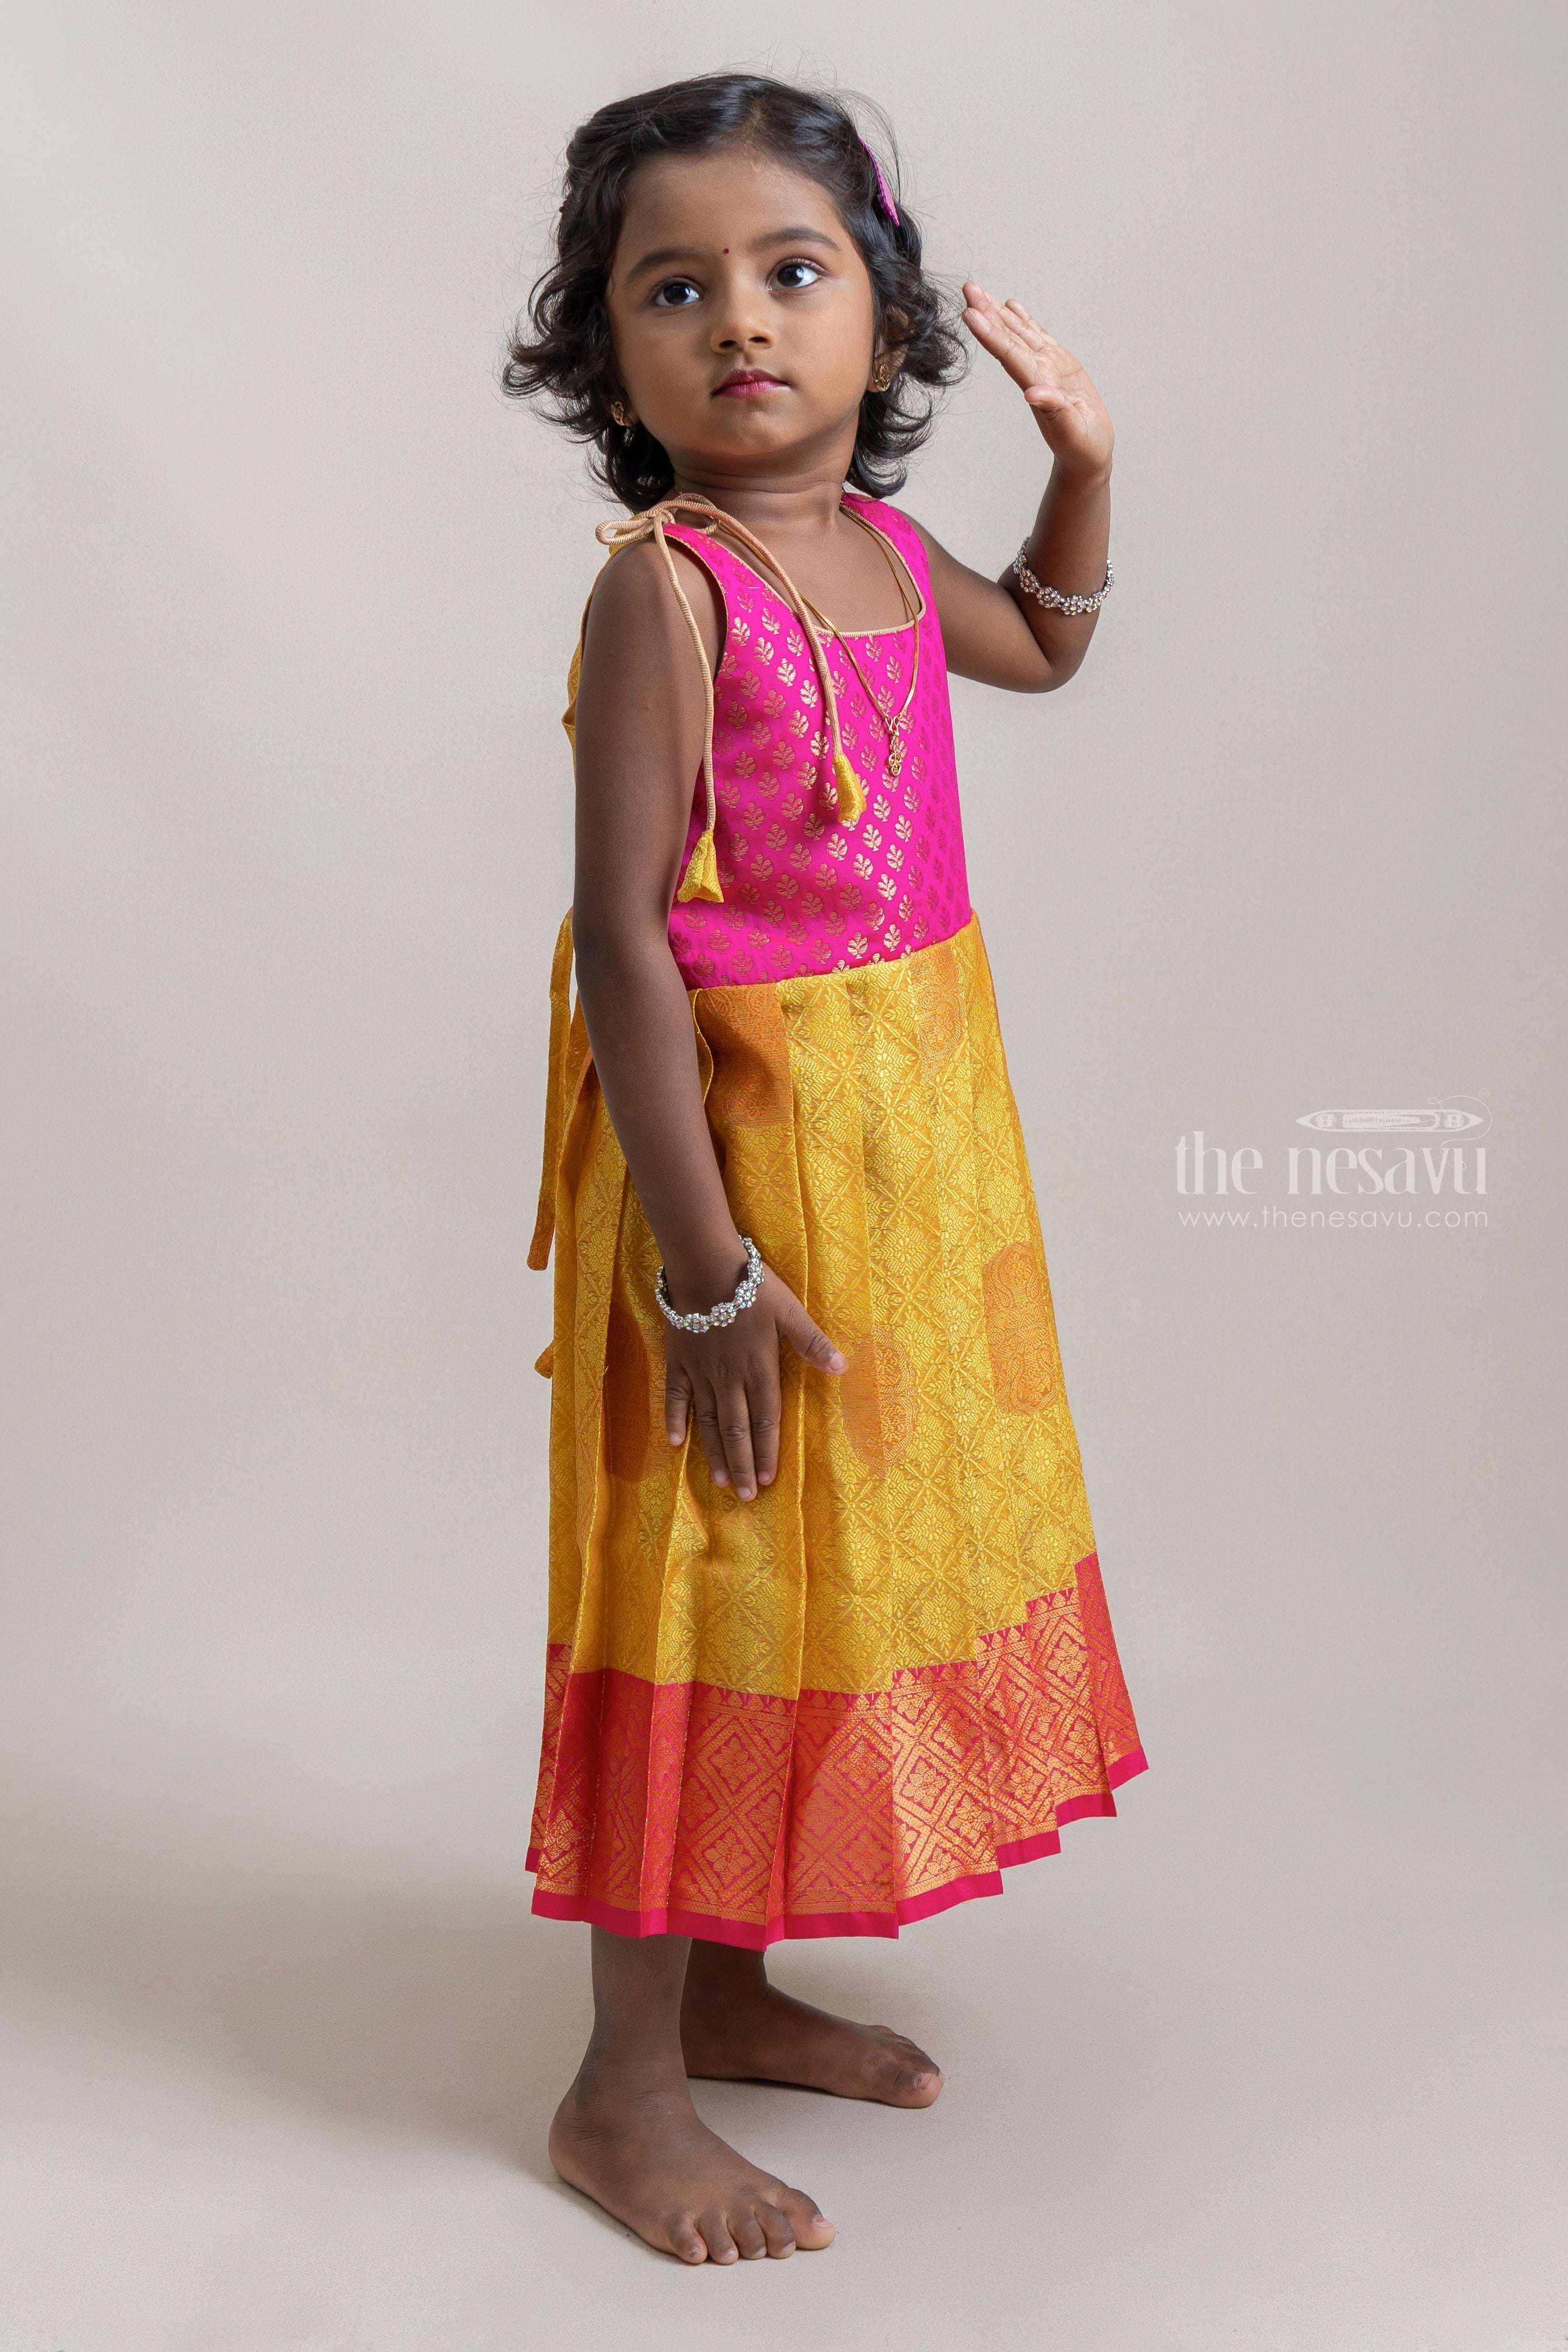 Traditional Kids Wear for Diwali - Kids Fashion Trends | Gowns for girls,  Frocks for girls, Indian bridesmaid dresses